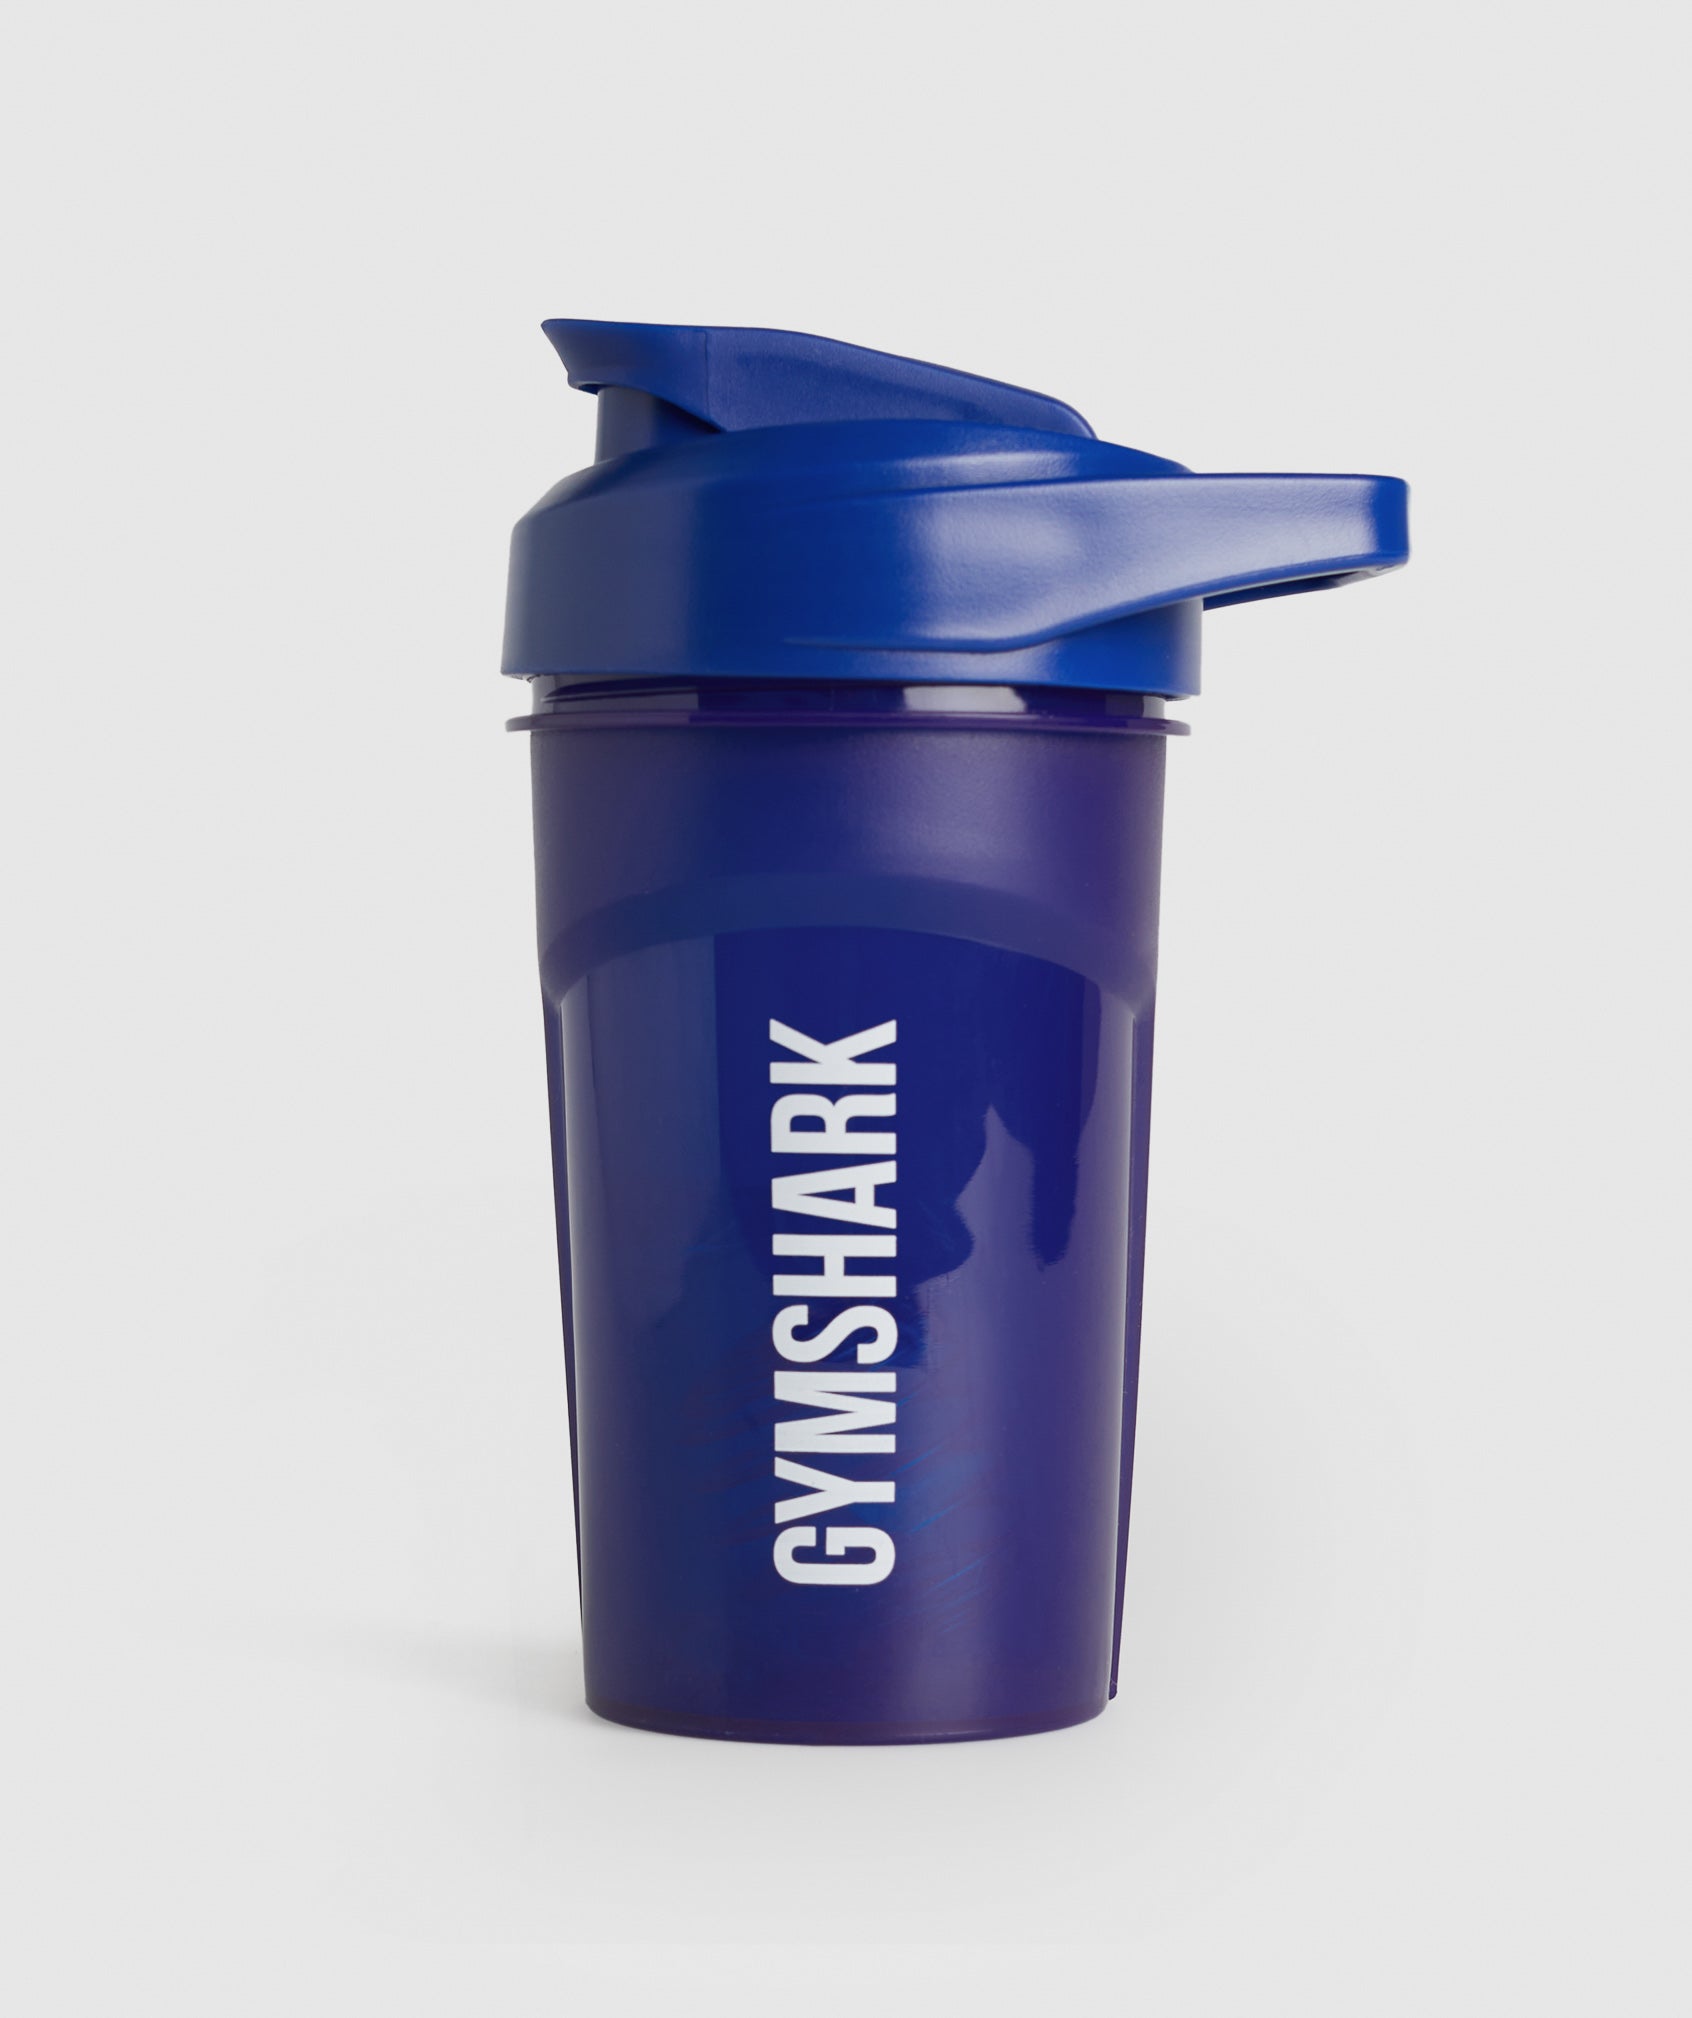 14oz Shaker Bottle in Wave Blue is out of stock